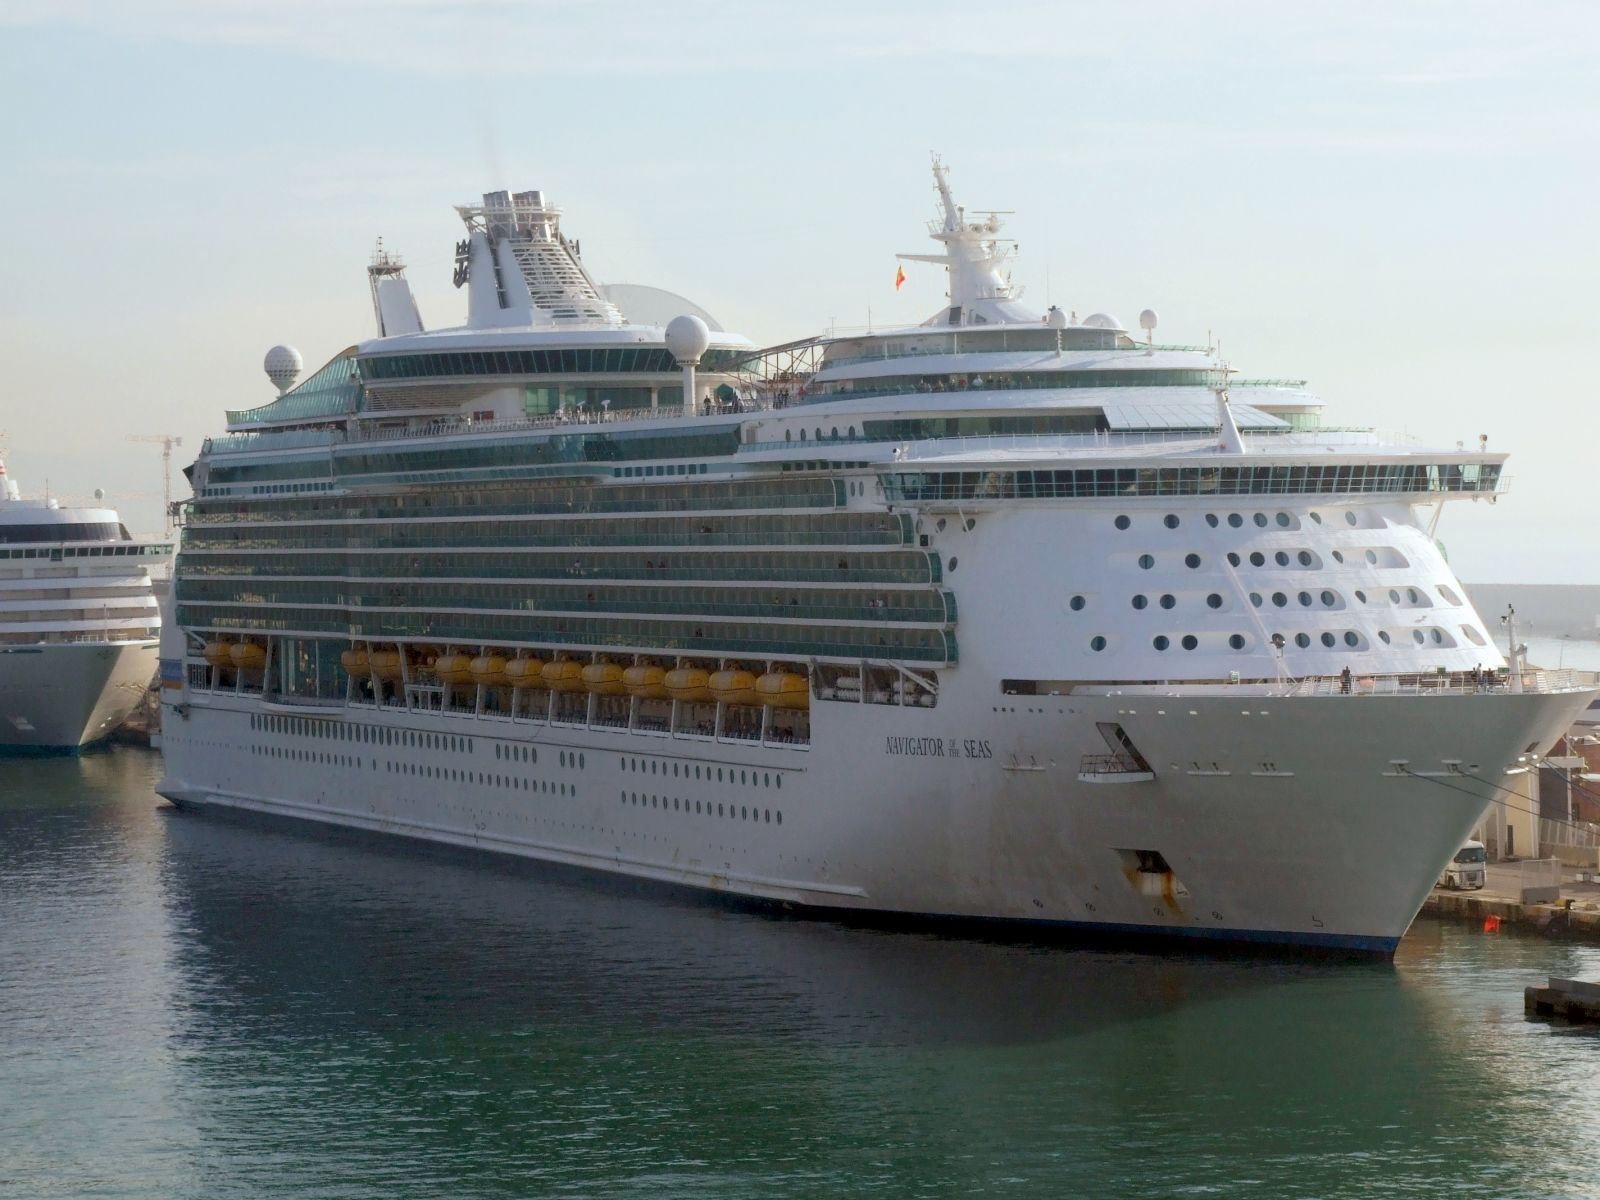 Navigator of the Seas' sailing canceled due to dry dock delay